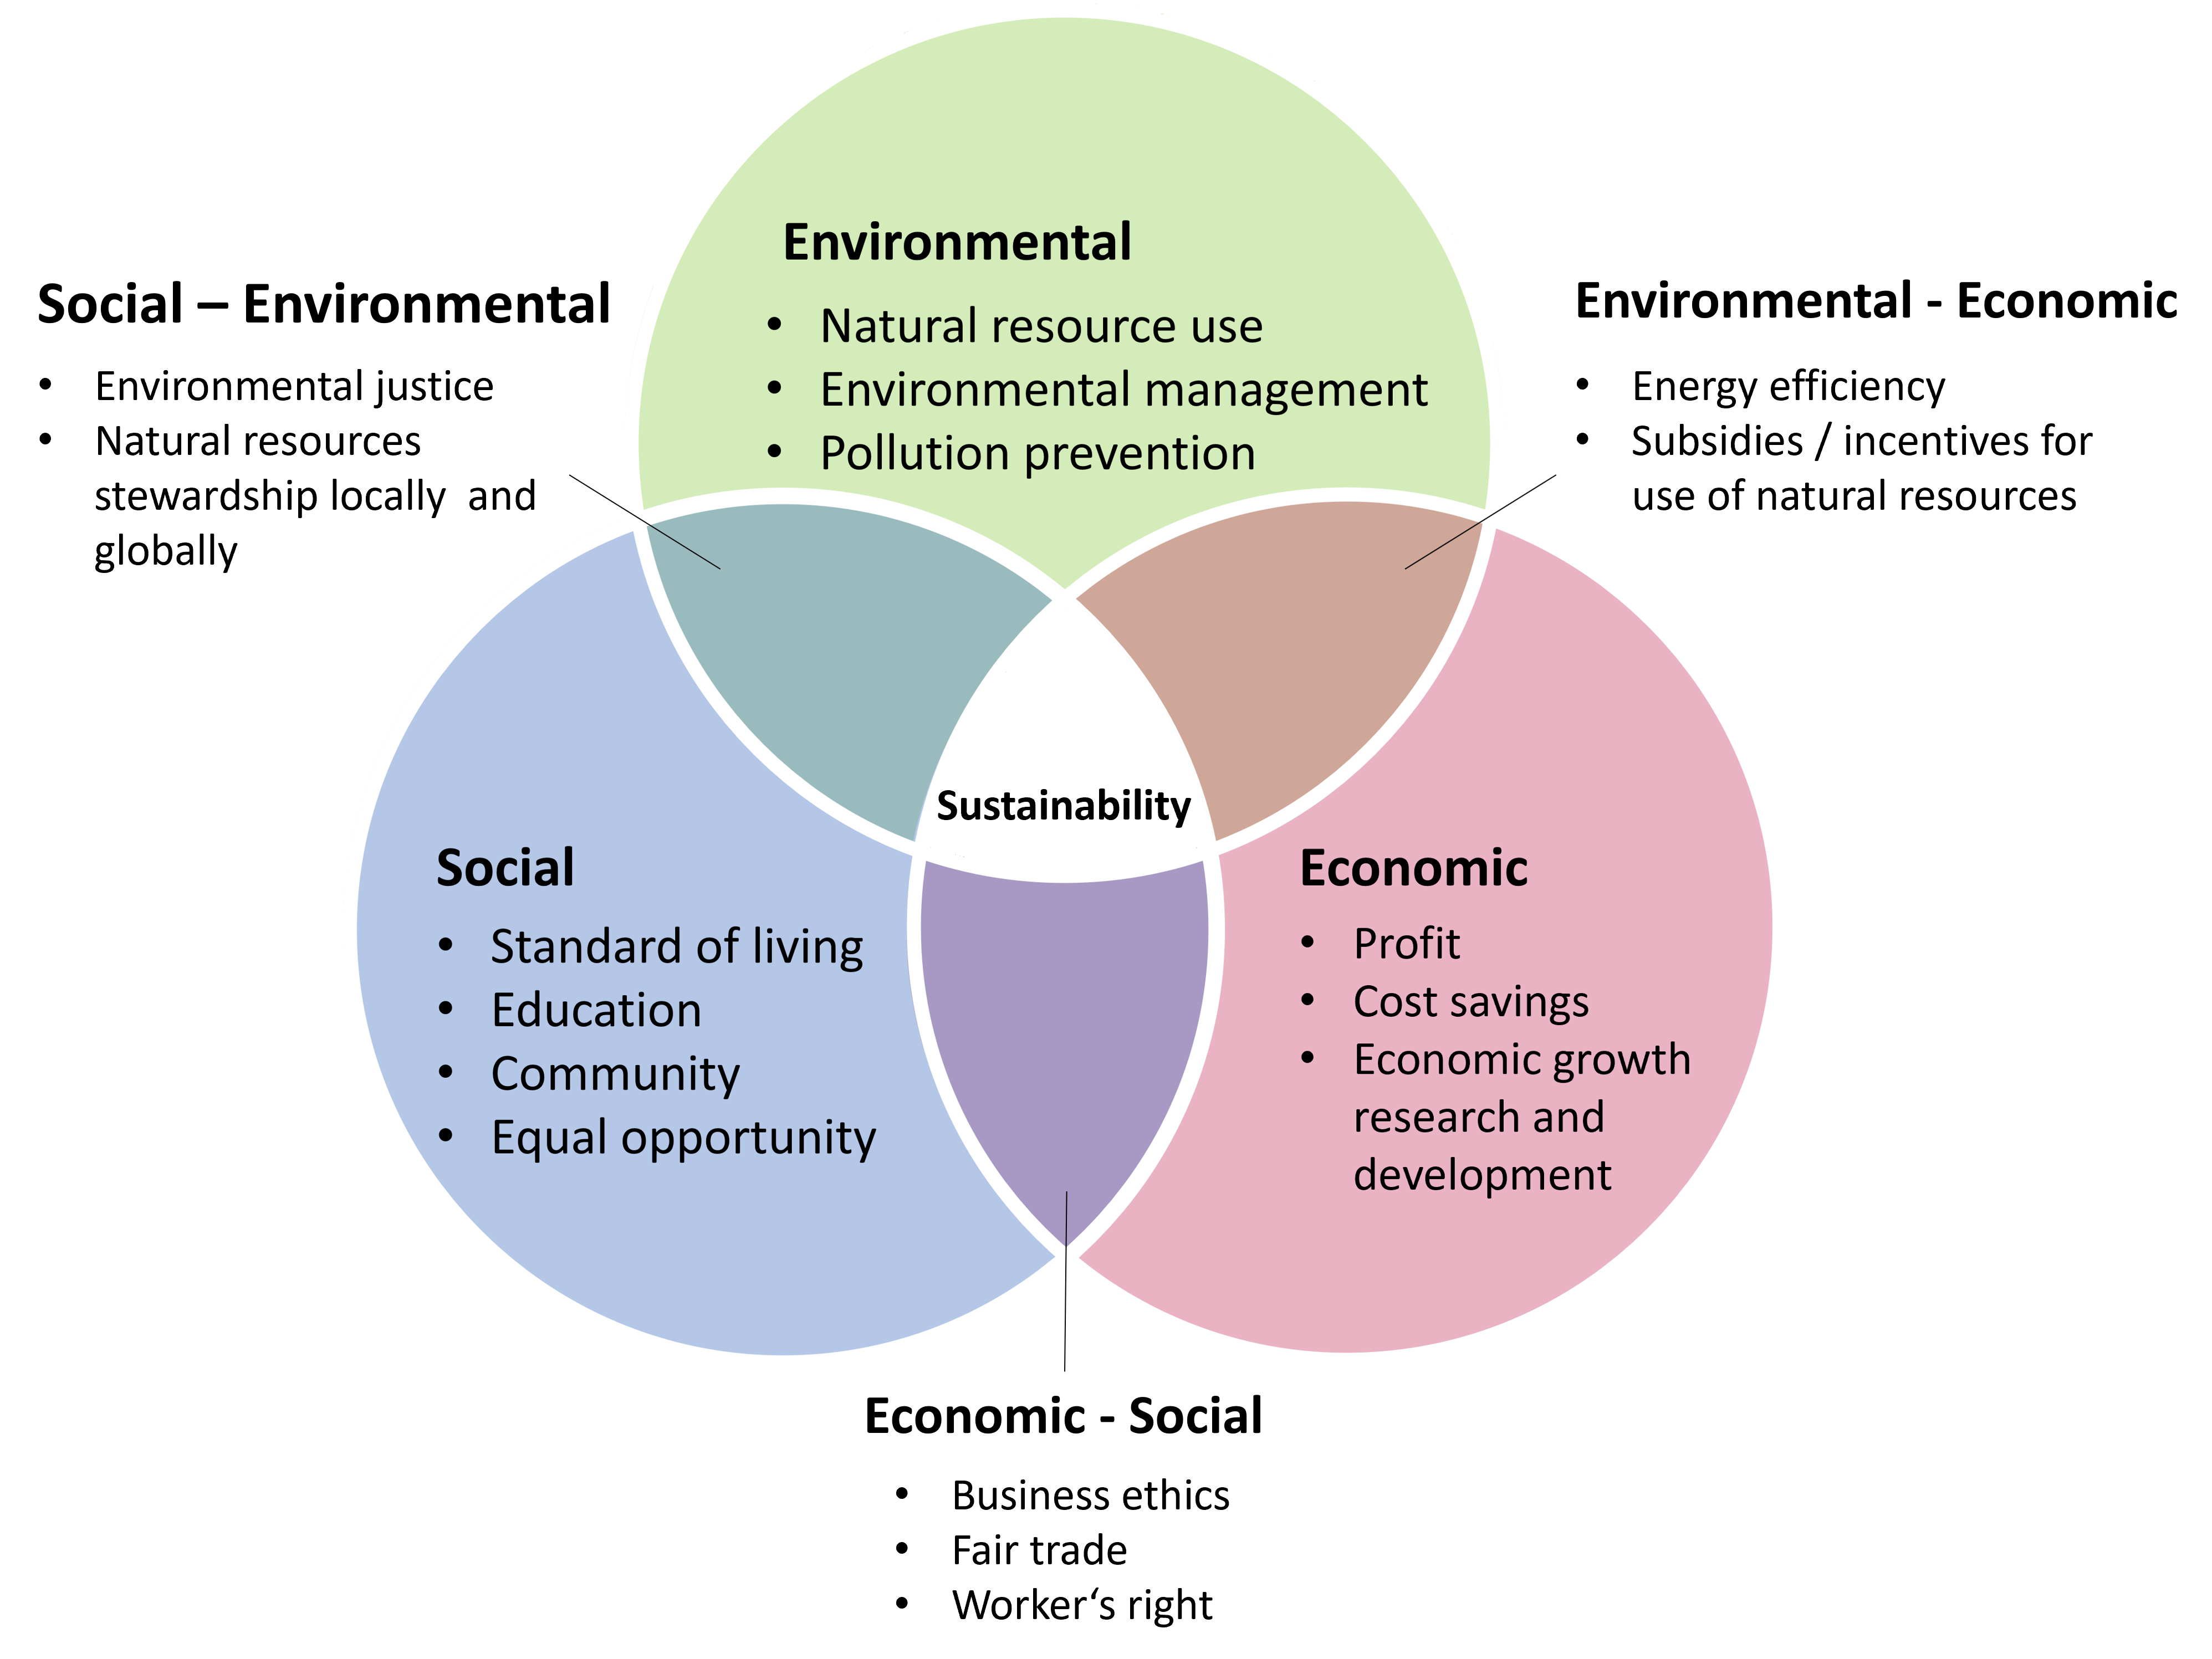 Sustainable development: Environmental pillar (natural resource use, environmental management, pollution prevention), economic pillar (profit, cost savings, economic growth research and development), social pillar (standard of living, education, community. equal opportunity).